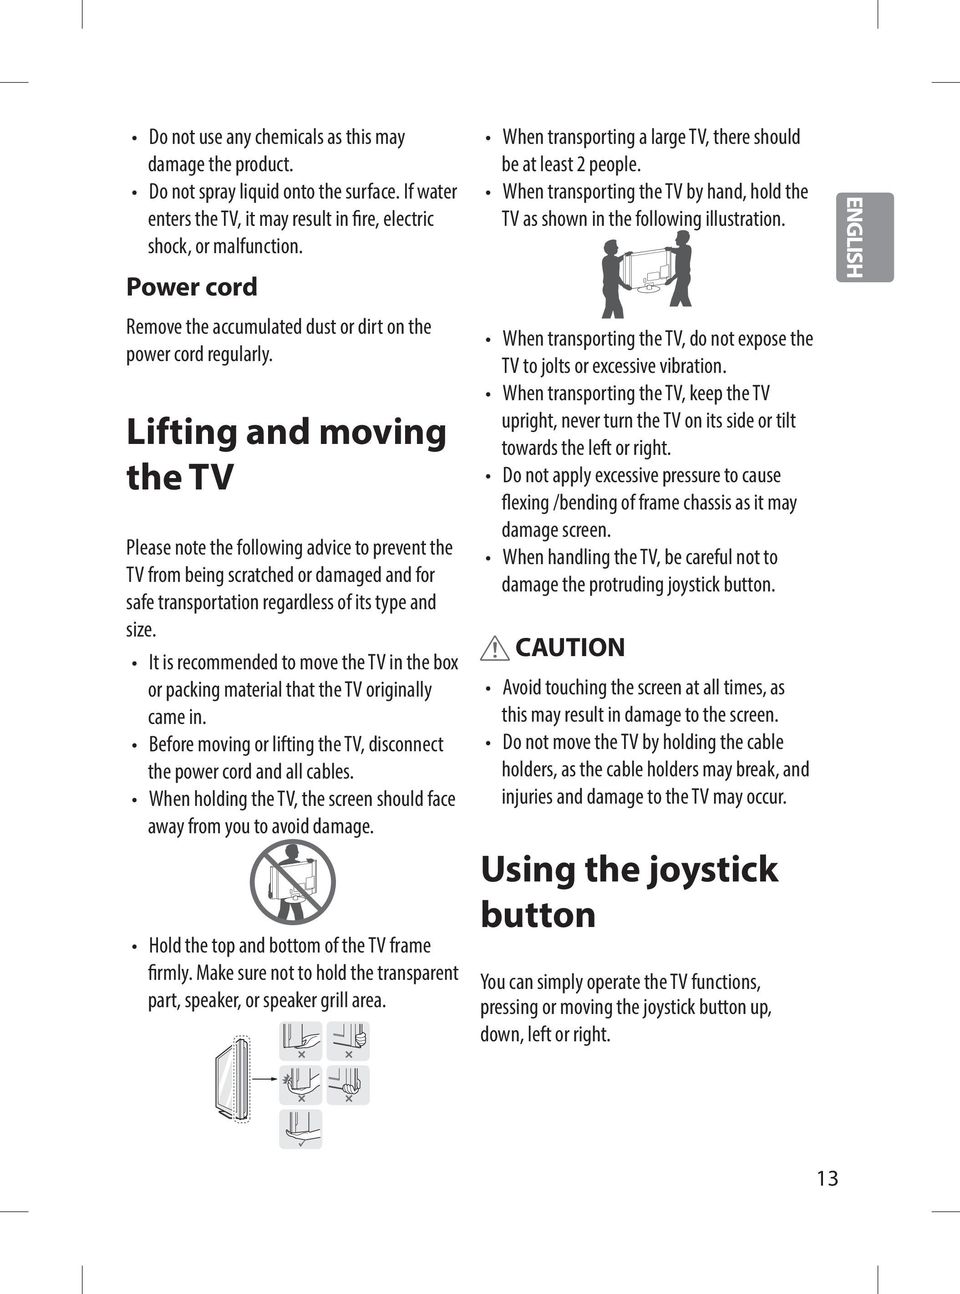 Lifting and moving the TV Please note the following advice to prevent the TV from being scratched or damaged and for safe transportation regardless of its type and size.